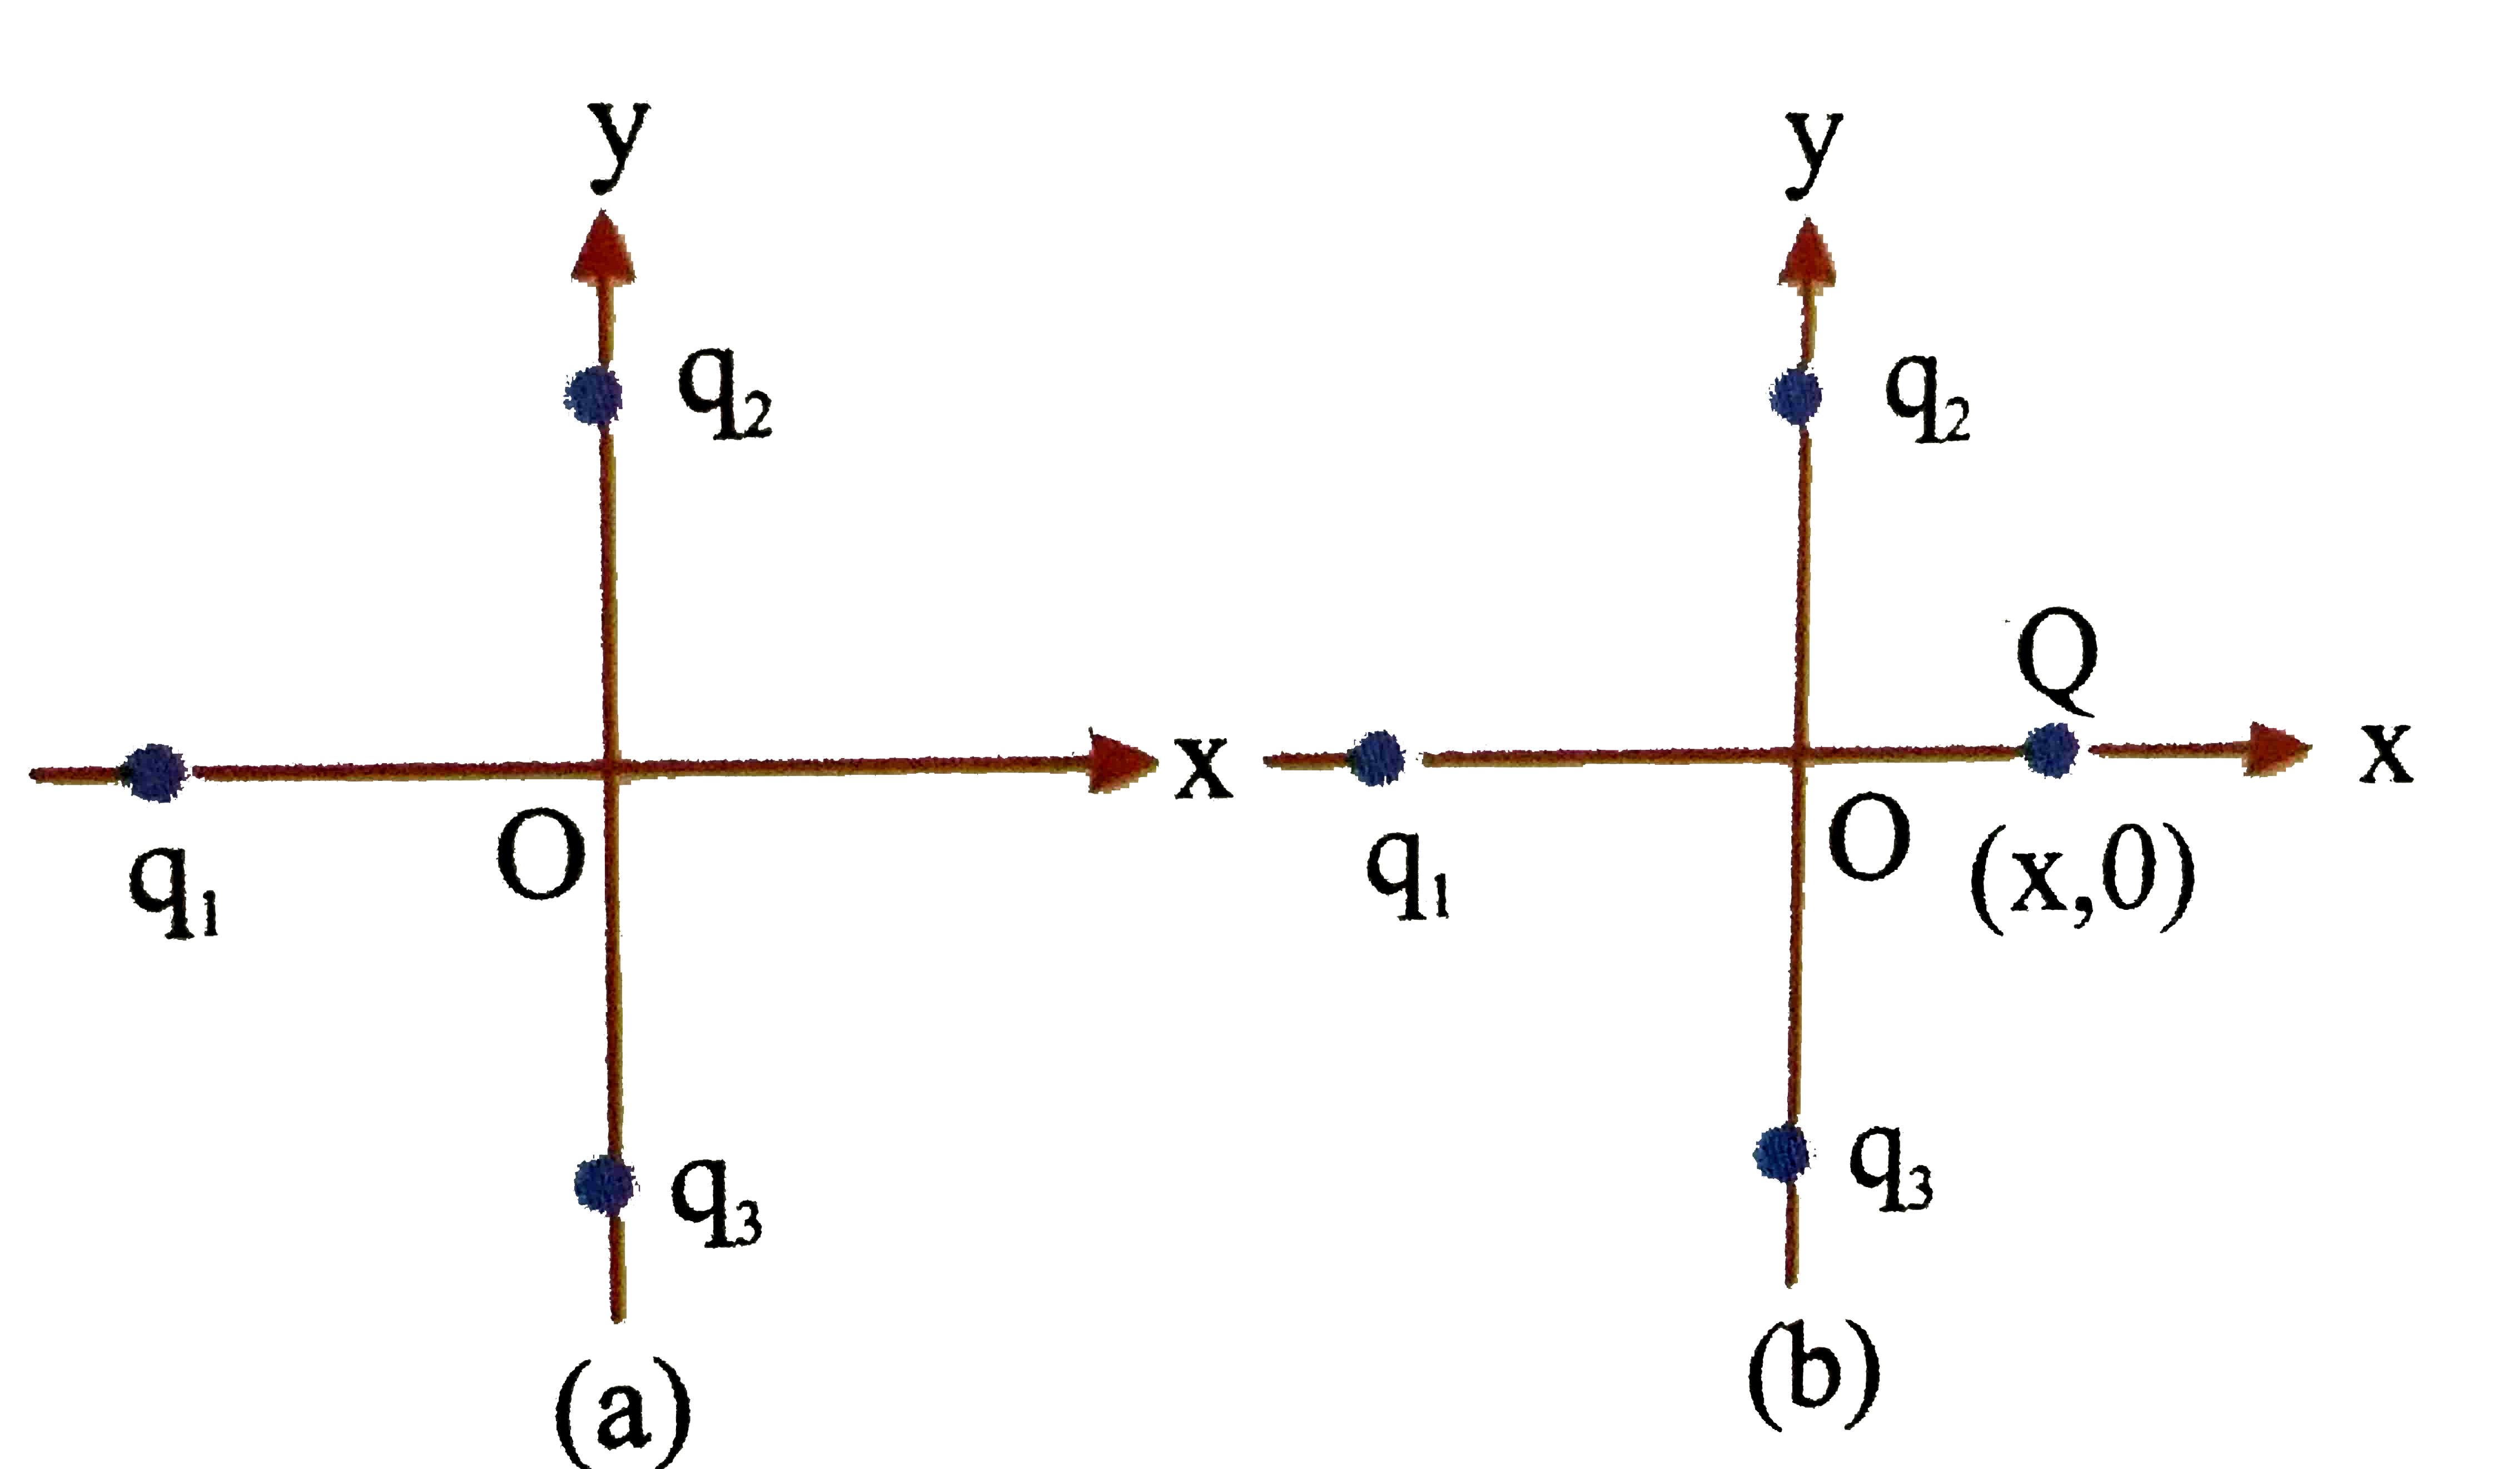 In figure two positive charges q(2) and q(3) fixed along the y-axis, exert a net electric force in the +x direction on a charge q(1) fixed along the x-axis if a positive charge Q is  added at (x,0) the force on q(1)